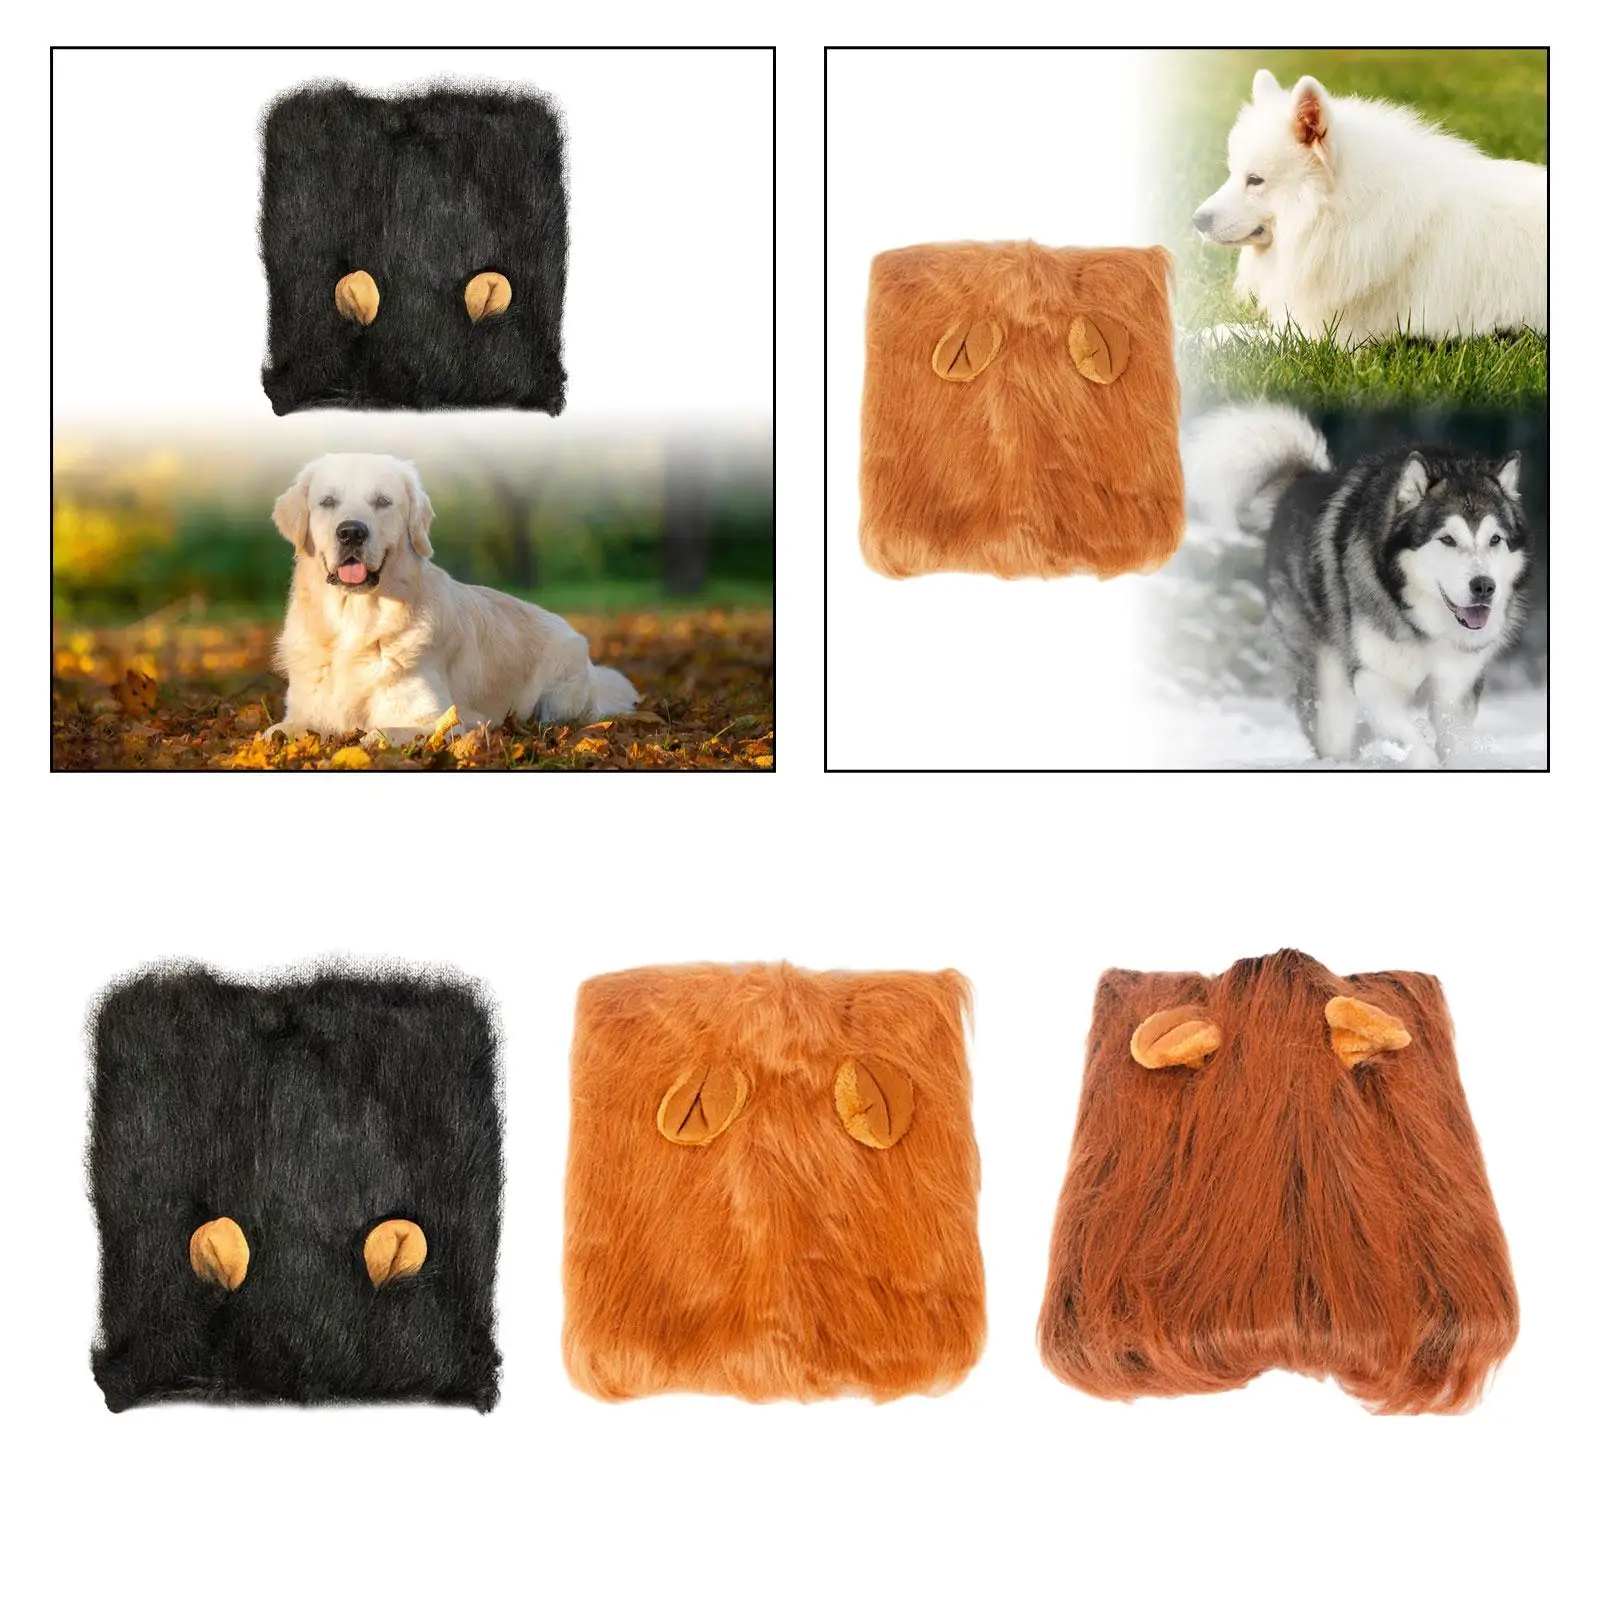 Cat Mane Costume Pet Clothes Funny Cute Headwear Pet Costume Mane Hood for Photo Props Fancy Dress up Large Dogs Role Play Party